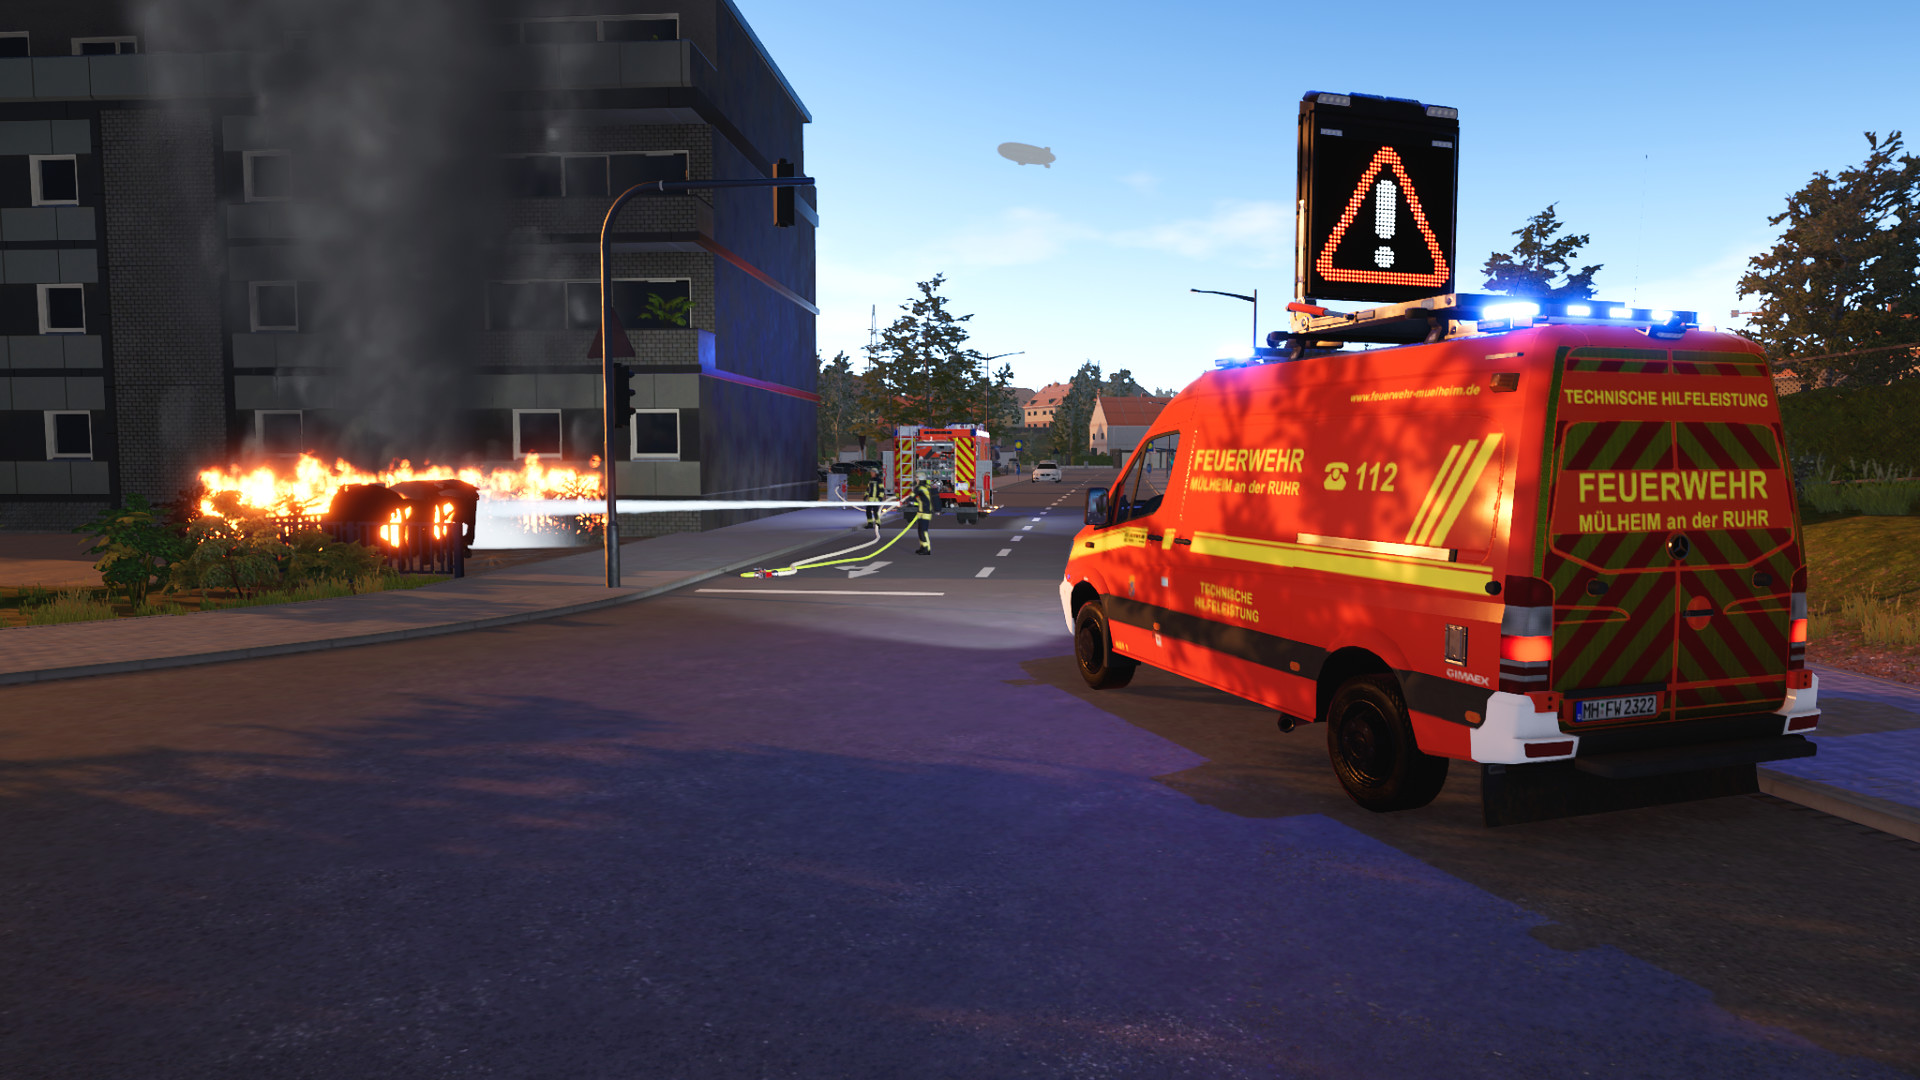 Emergency Call 112 – Steam 2 Fire Fighting Simulation on The